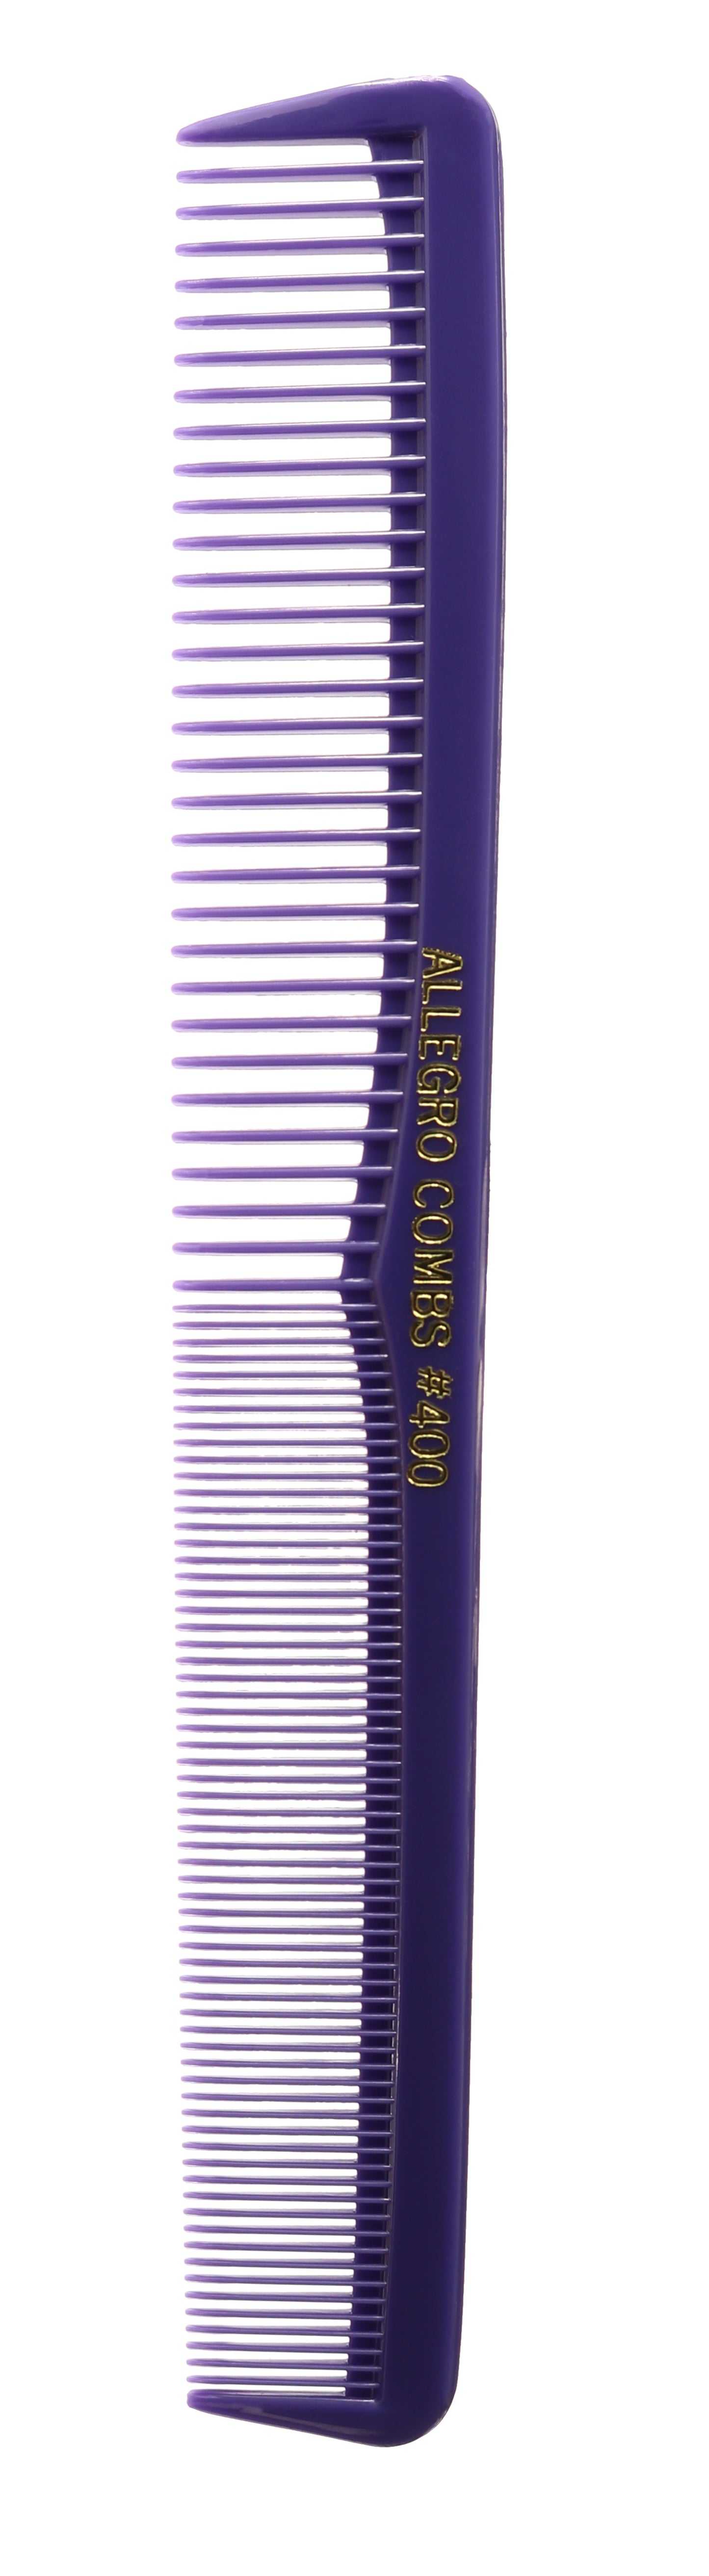 Allegro Combs 400 Barber For Hair Cutting All Purpose Combs Women's Men's Fresh Mix 12 Pk